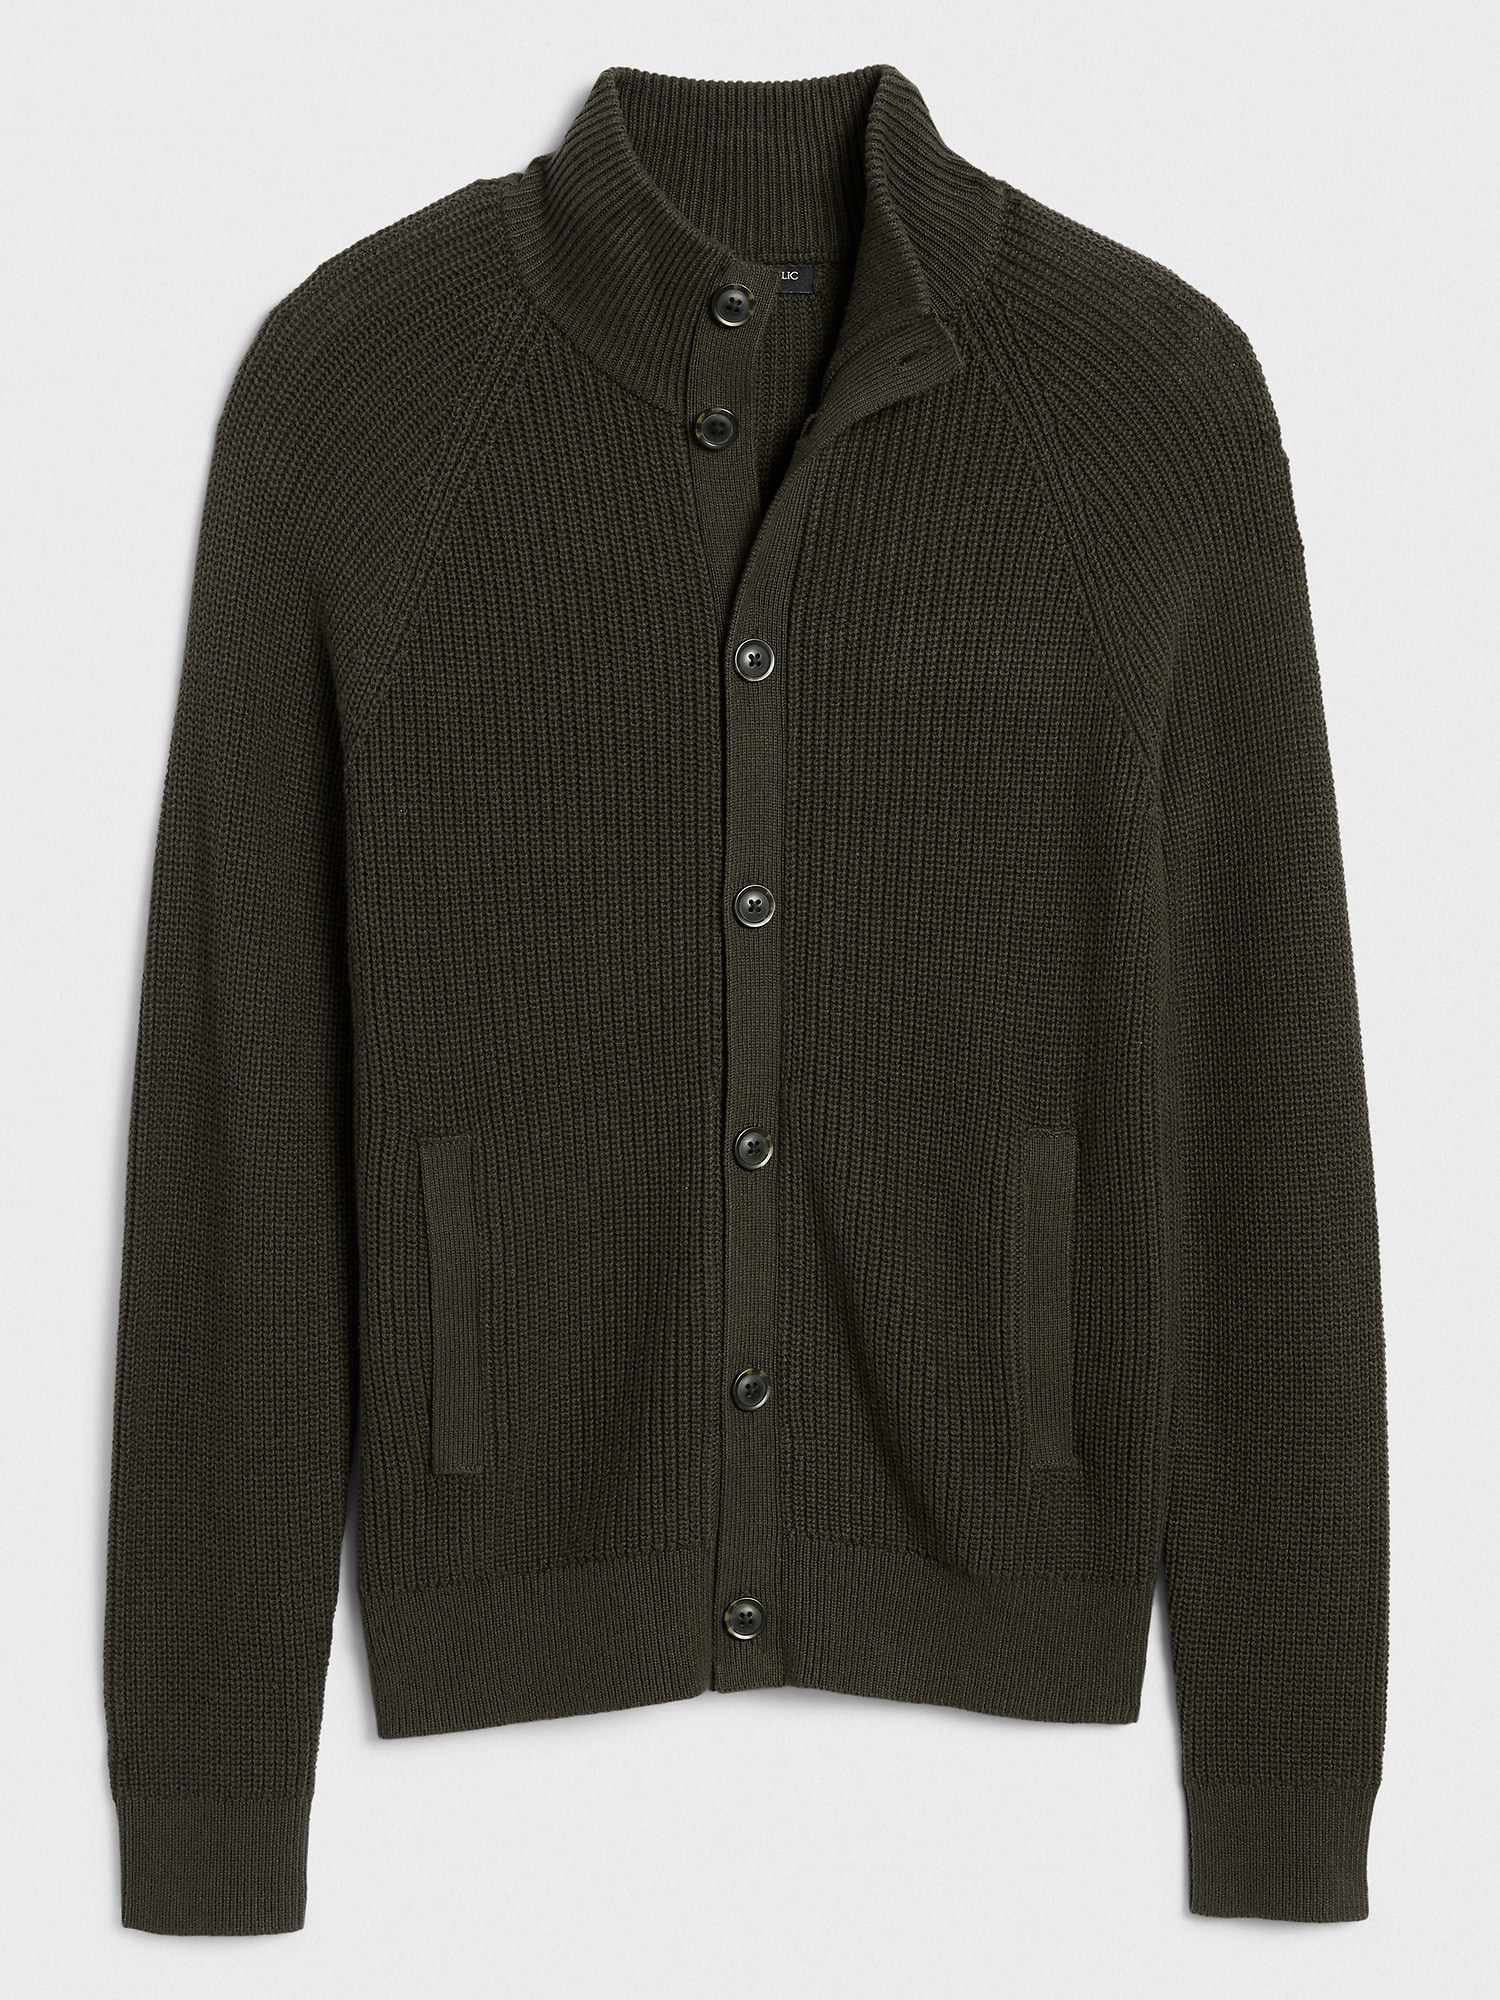 Ribbed Mock-Neck Button Down Jacket